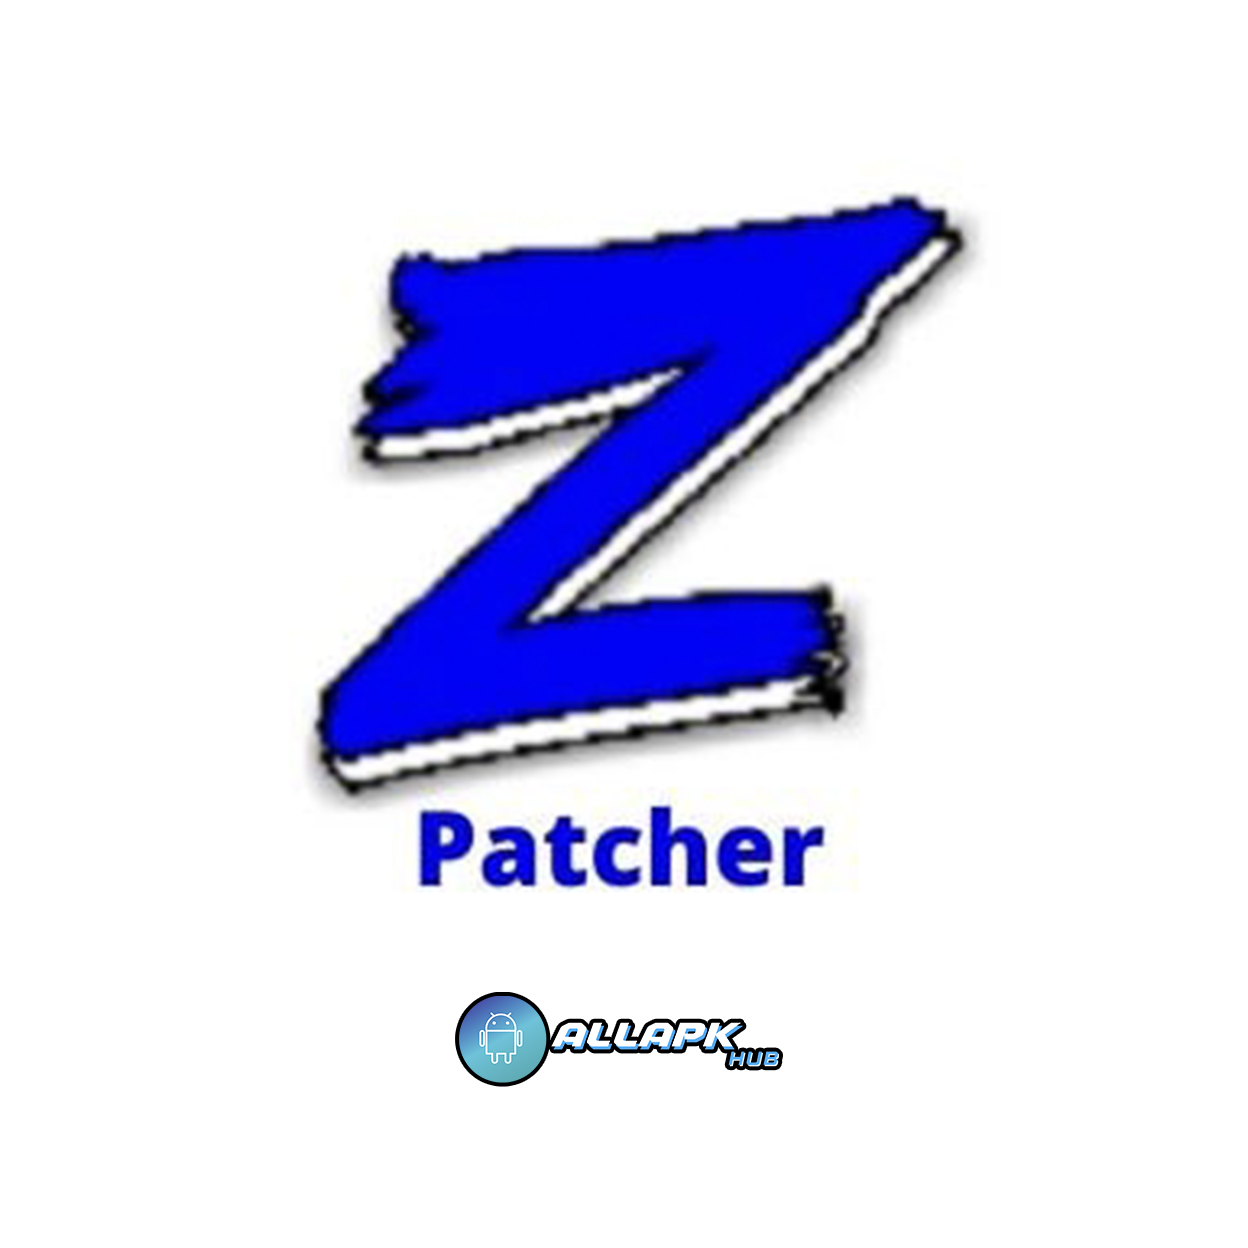 ZPatcher Injector